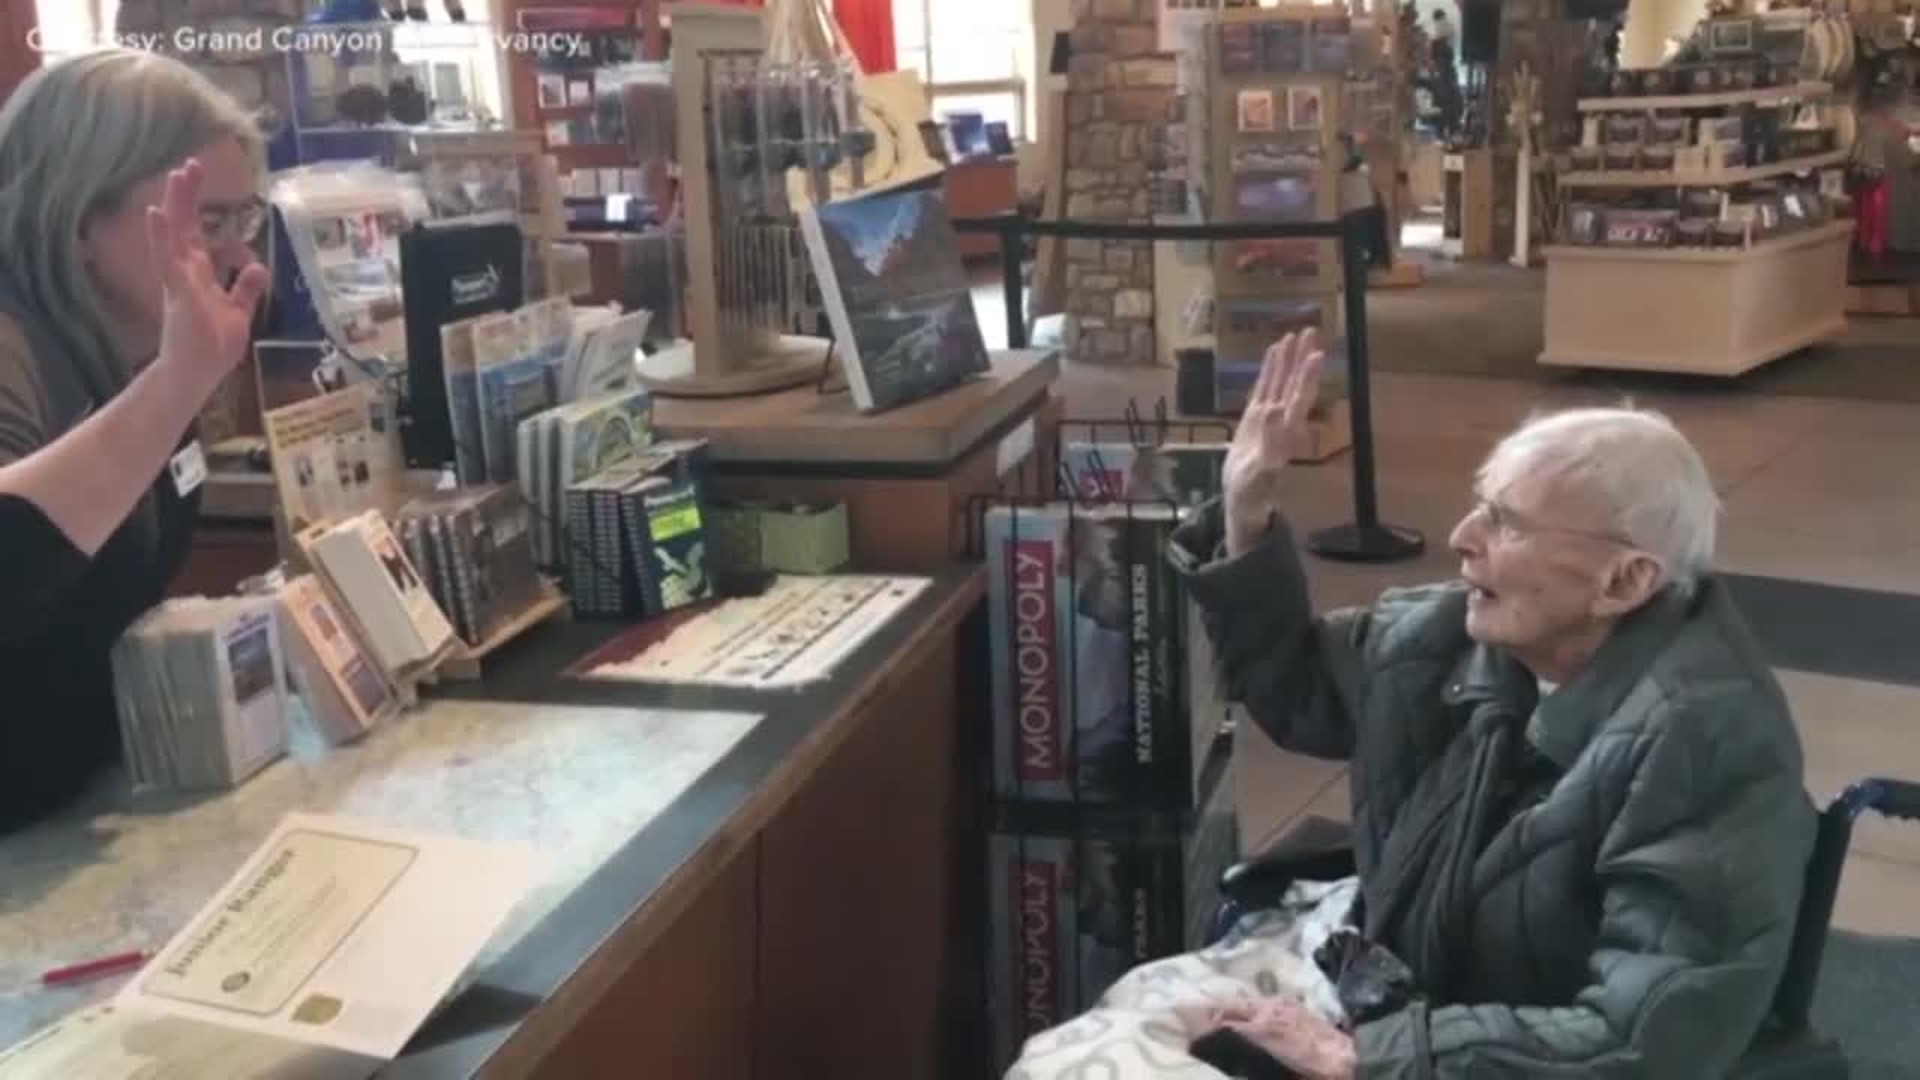 'It's absolutely breathtaking': 103-year-old woman becomes junior ranger at Grand Canyon